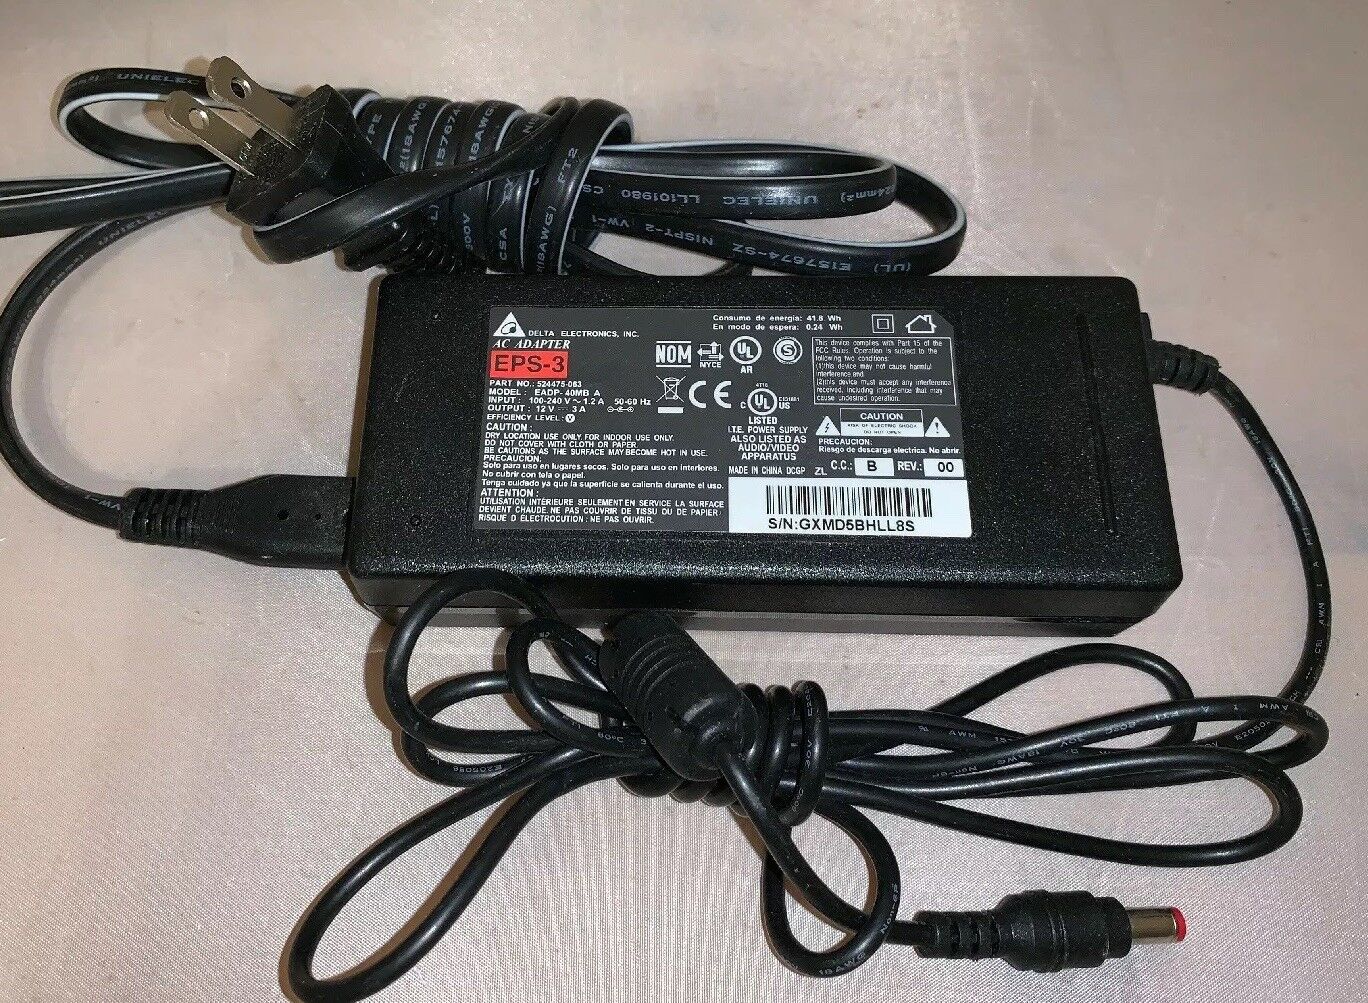 *Brand NEW*Delta Electronics EPS-3 EADP-40MB A (524475-063) 12V 3 A AC ADAPTER Power Supply